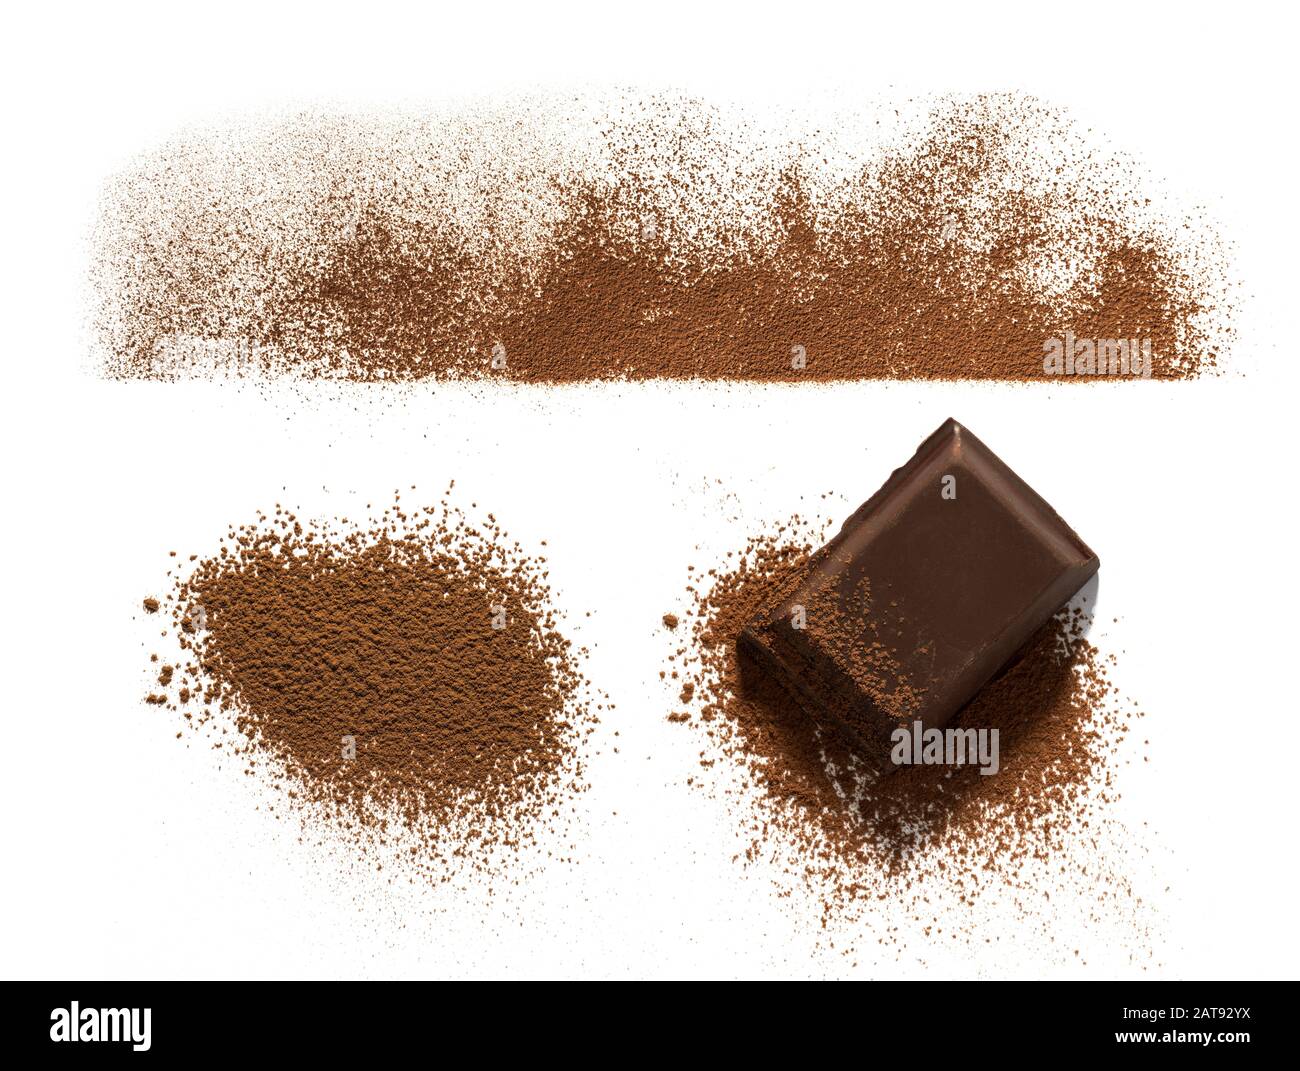 Chocolate and Cocoa powder line and heap and chocolate piece isolated on white background Stock Photo